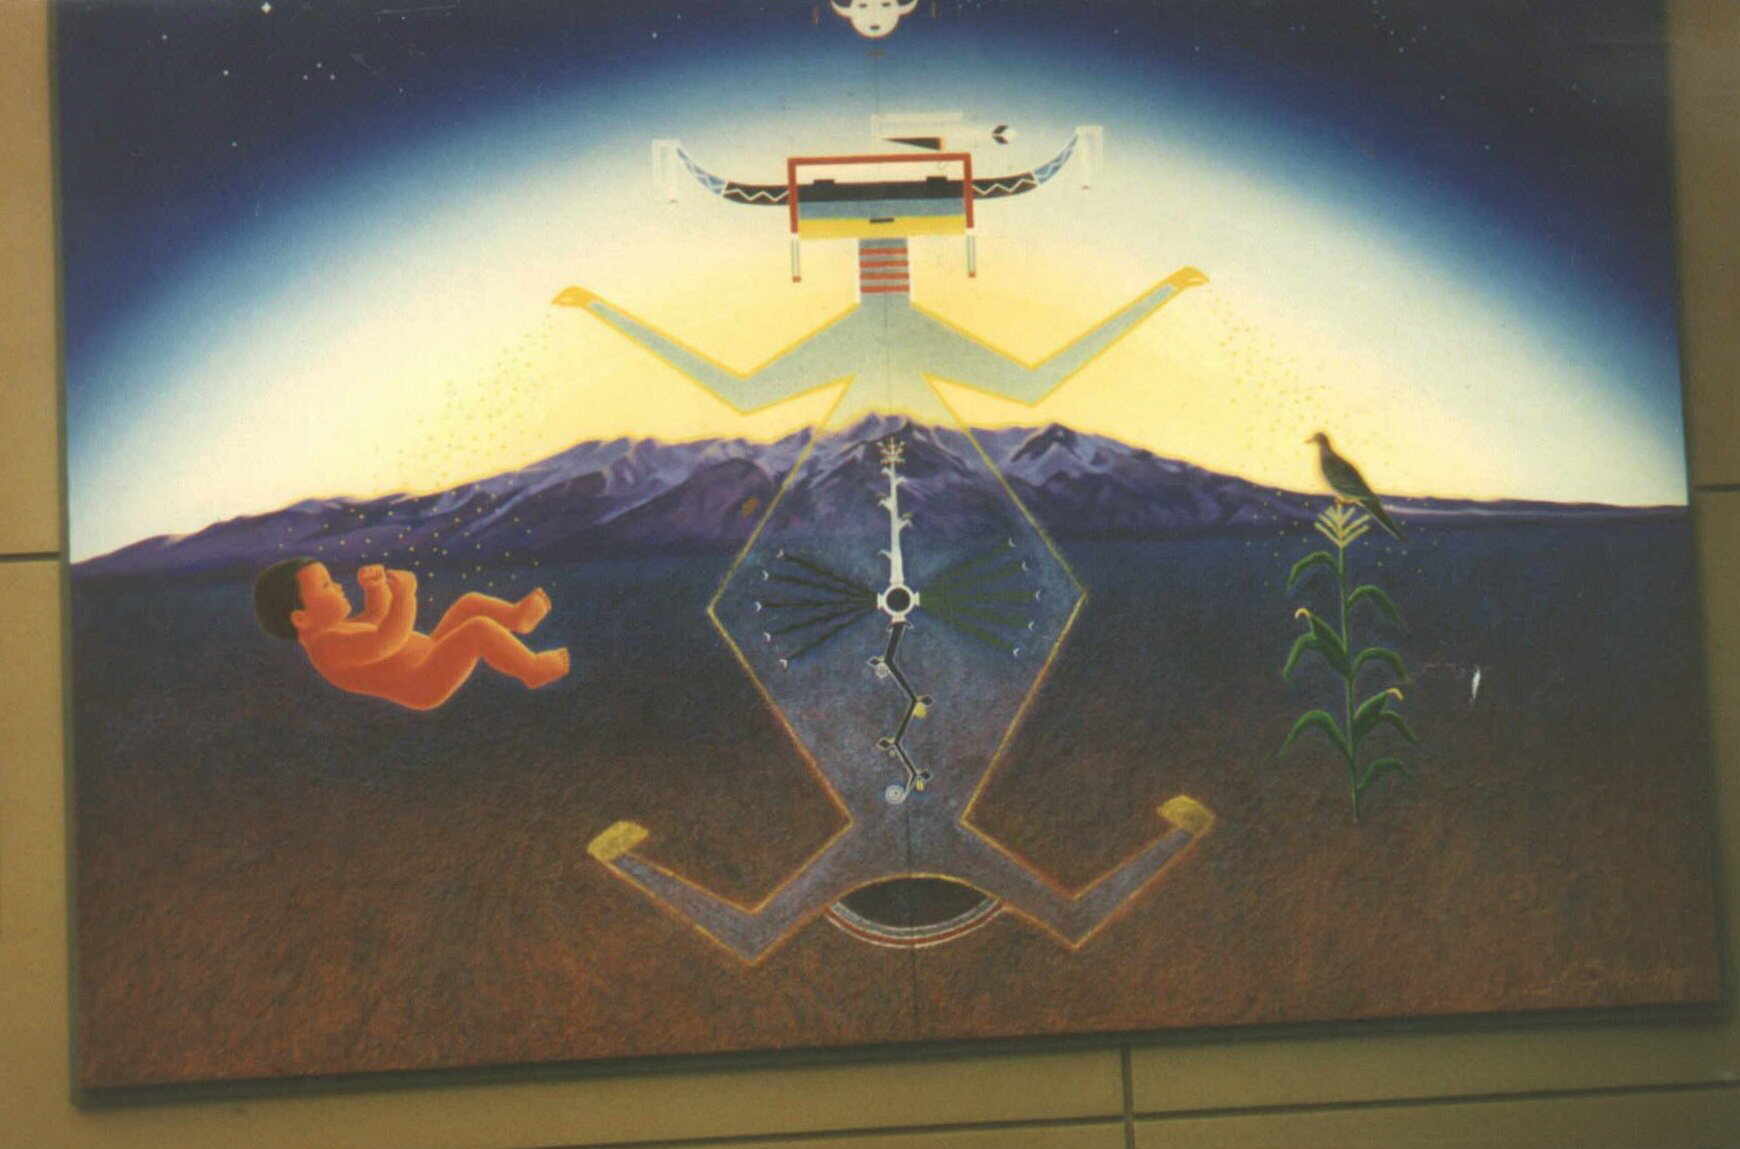 Denver Airport paintings and Nuclear War - Survivalist Forum